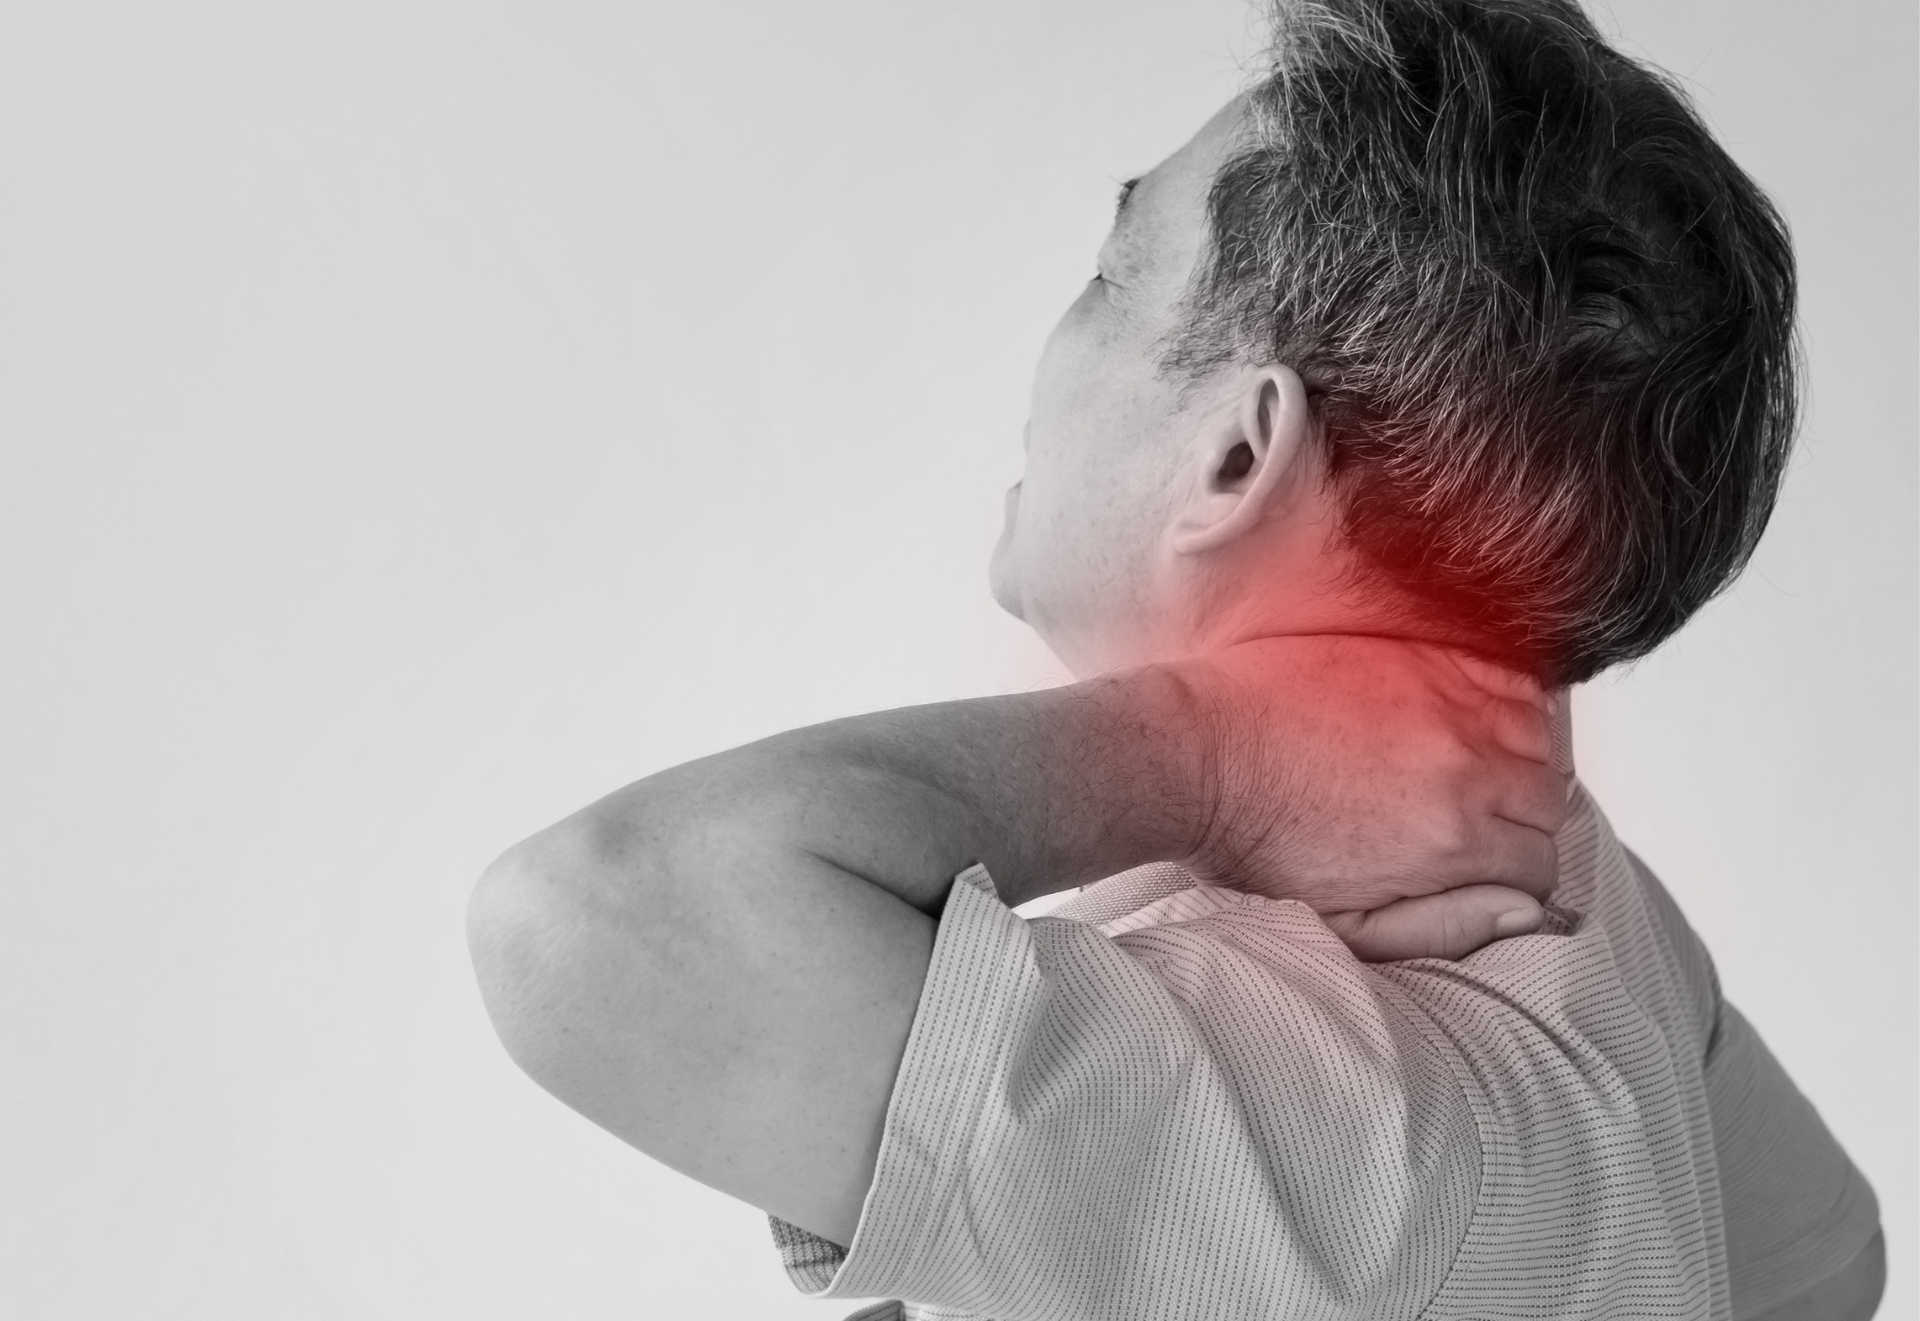 neck pain and shoulder pain for computer users